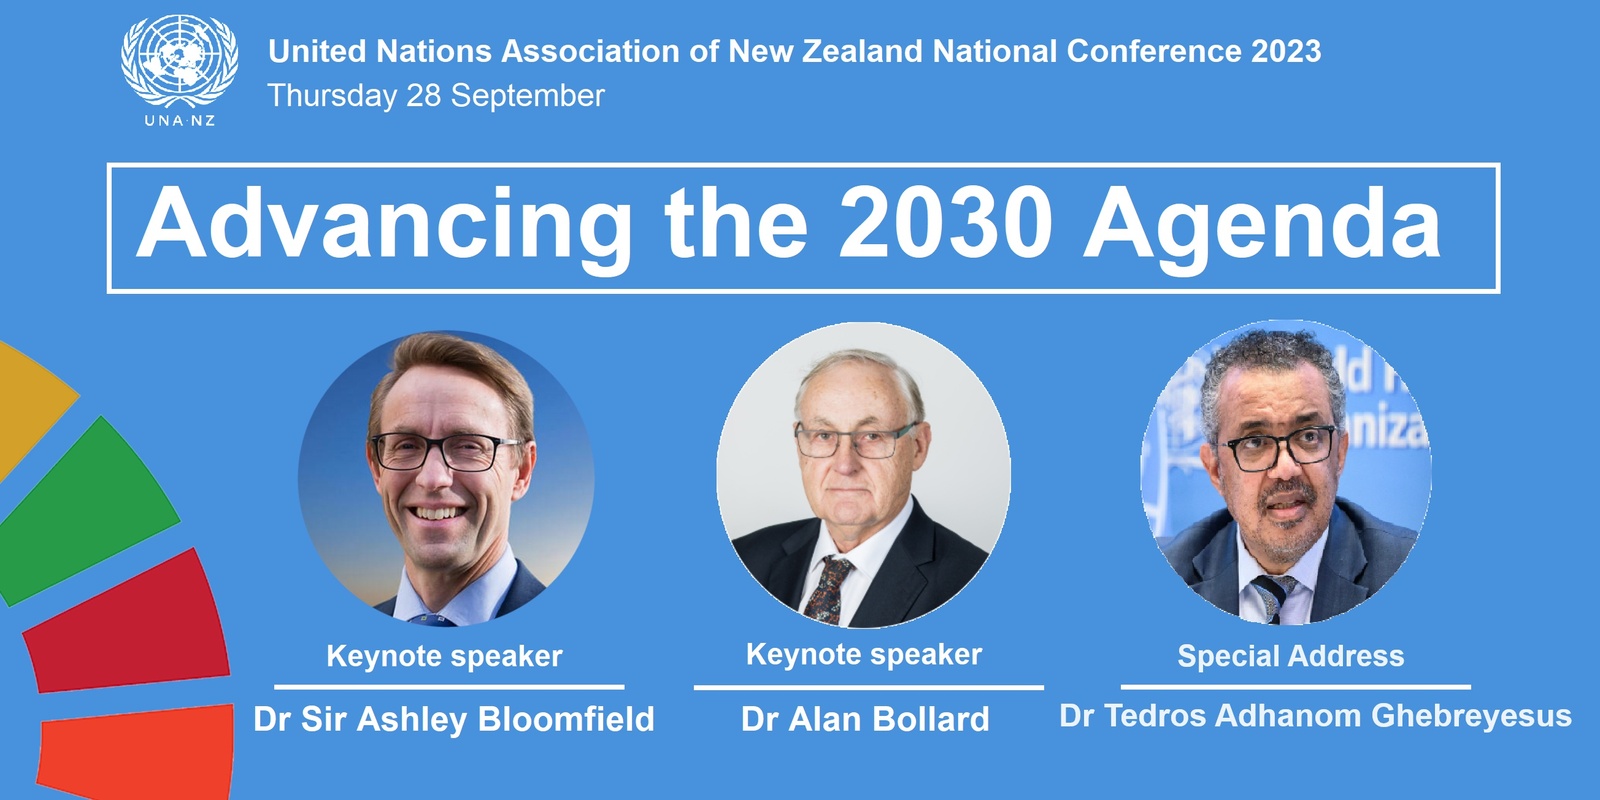 Banner image for UNA NZ National Conference 2023 - Advancing the 2030 Agenda